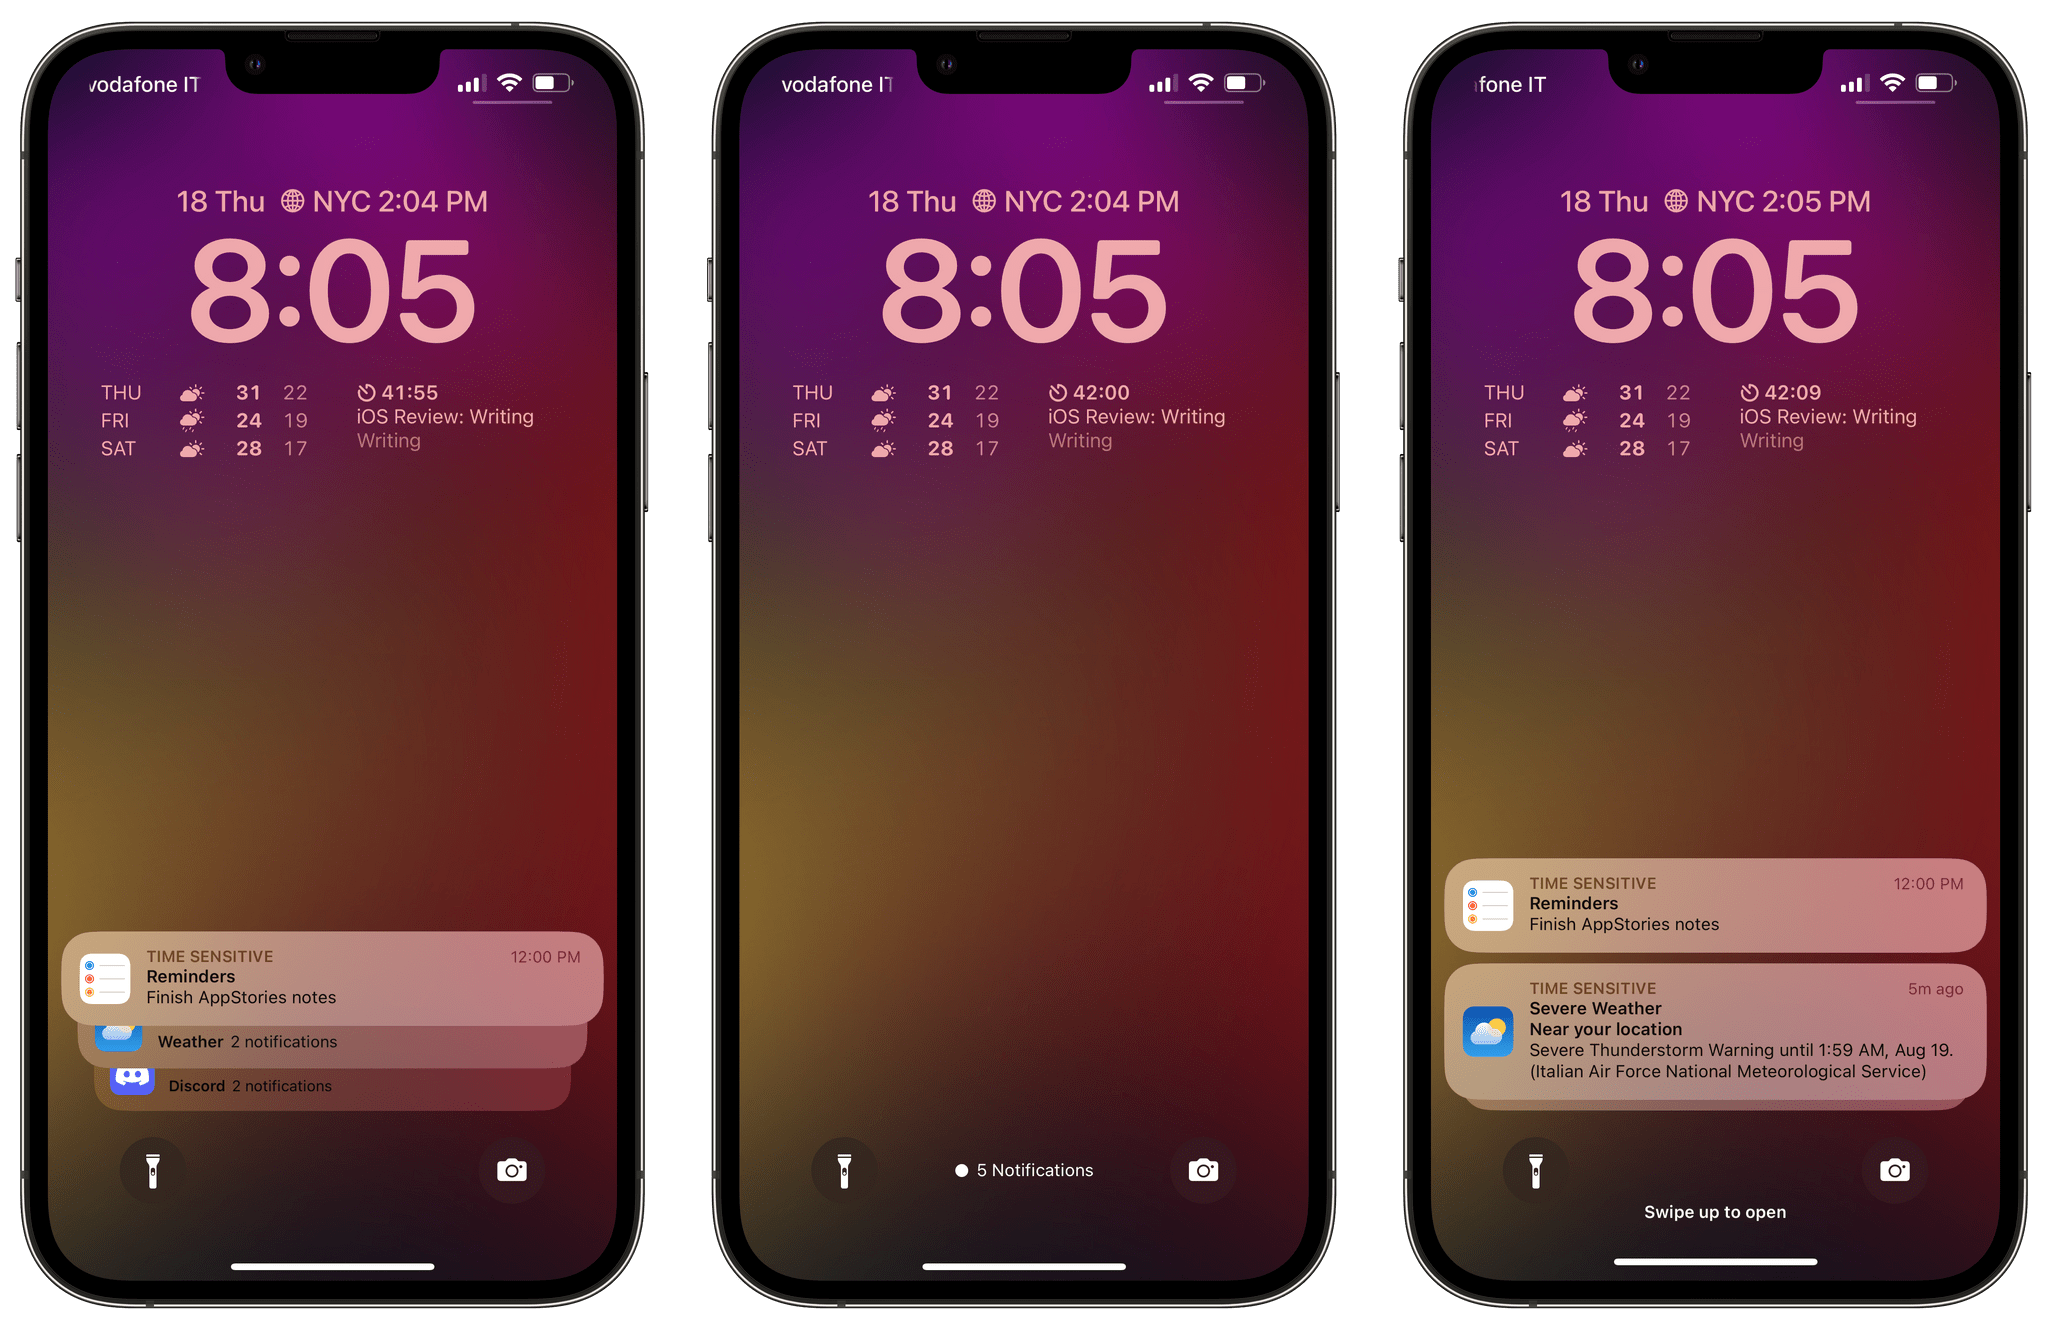 From left to right: the brand new stack mode (left), the also-new count, and the classic list display mode for notifications.